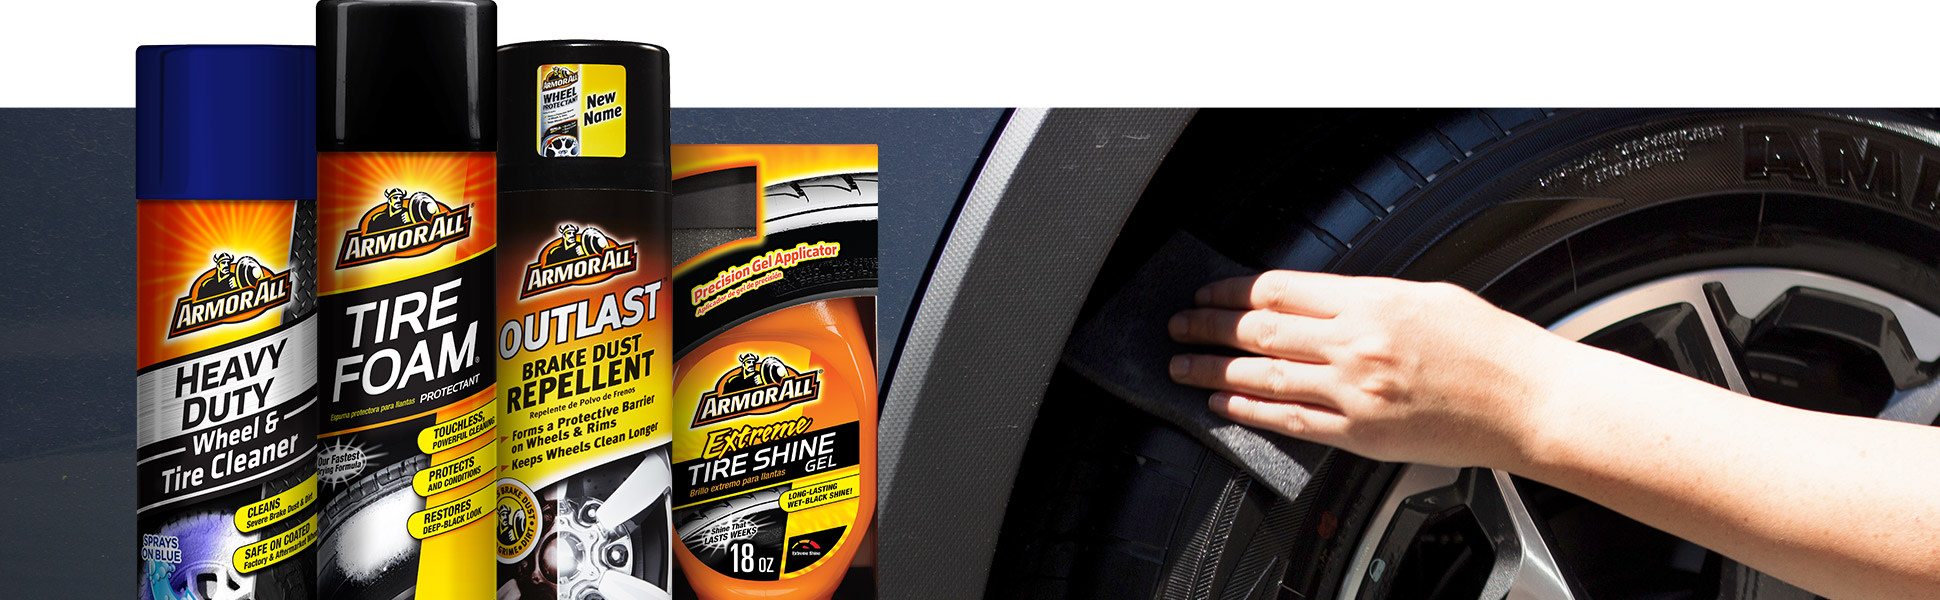 Armor All® Extreme Wheel and Tire Cleaner, 24 fl oz - City Market